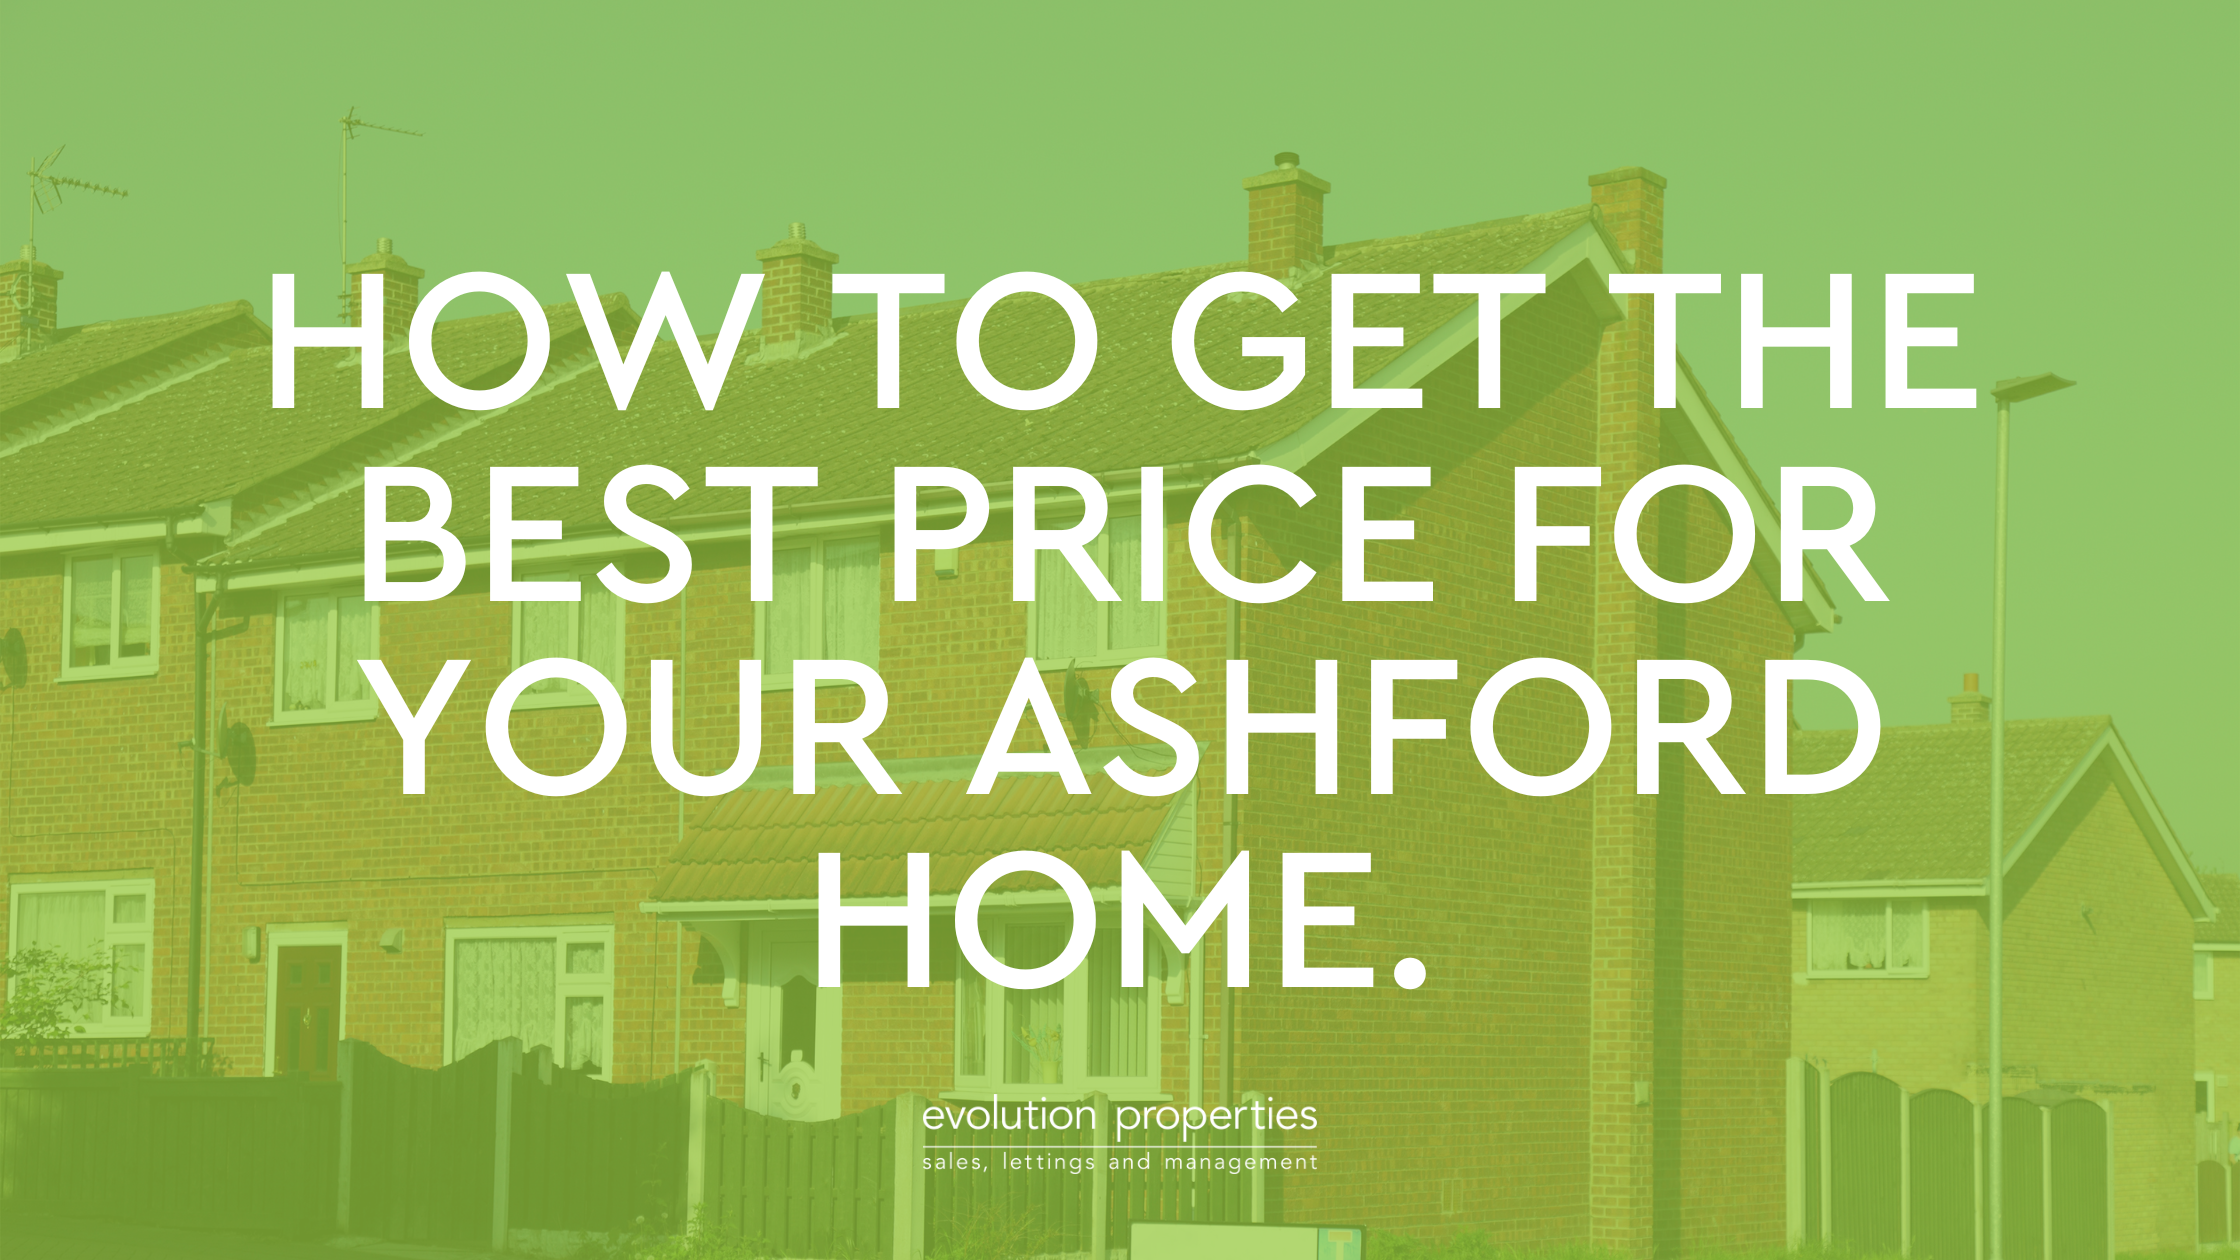 How to get the best price for your Ashford home